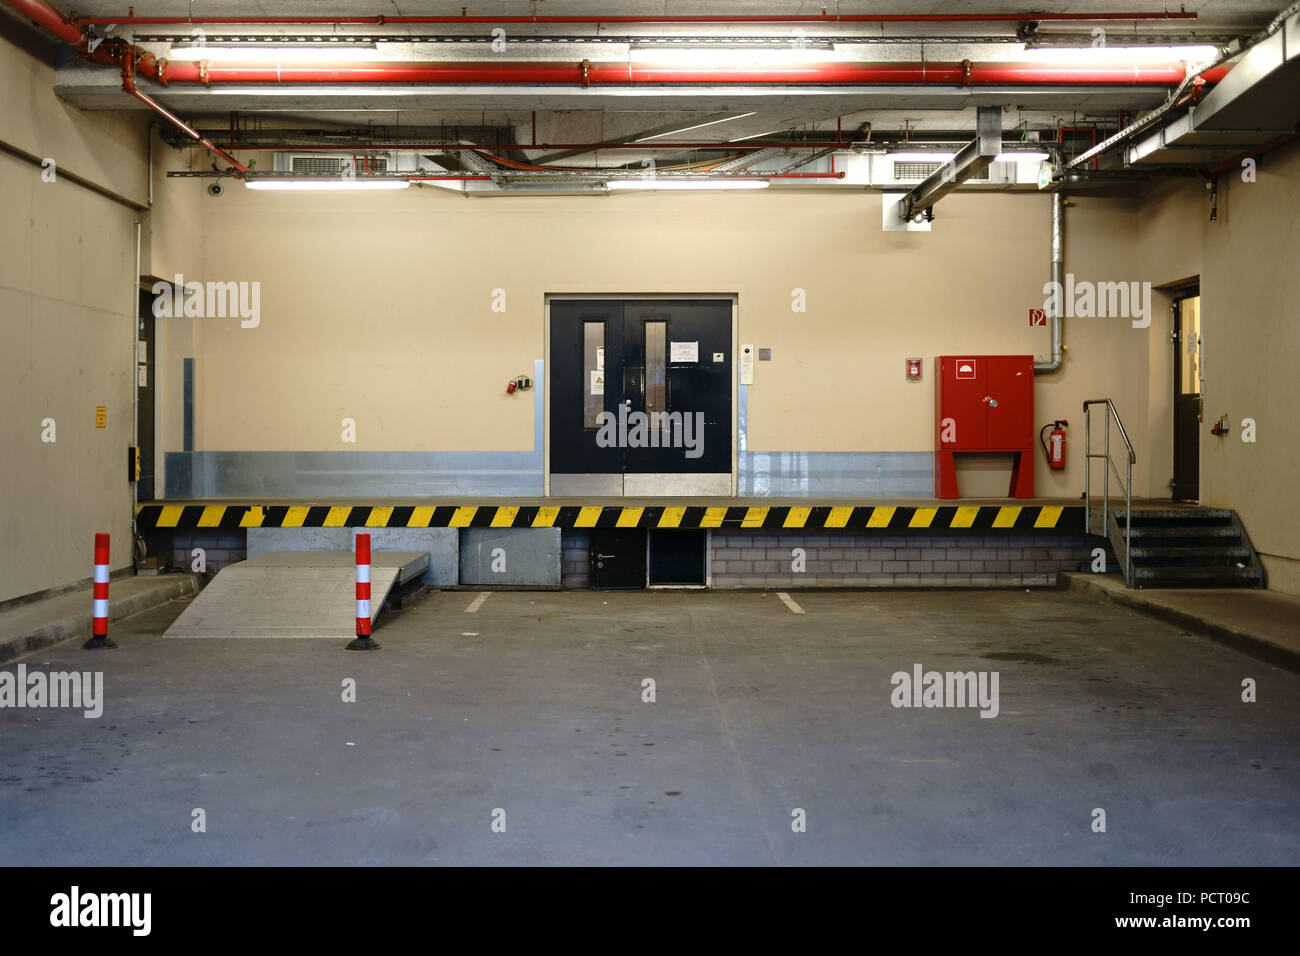 Loading ramp of a business building with fire protection equipment Stock Photo